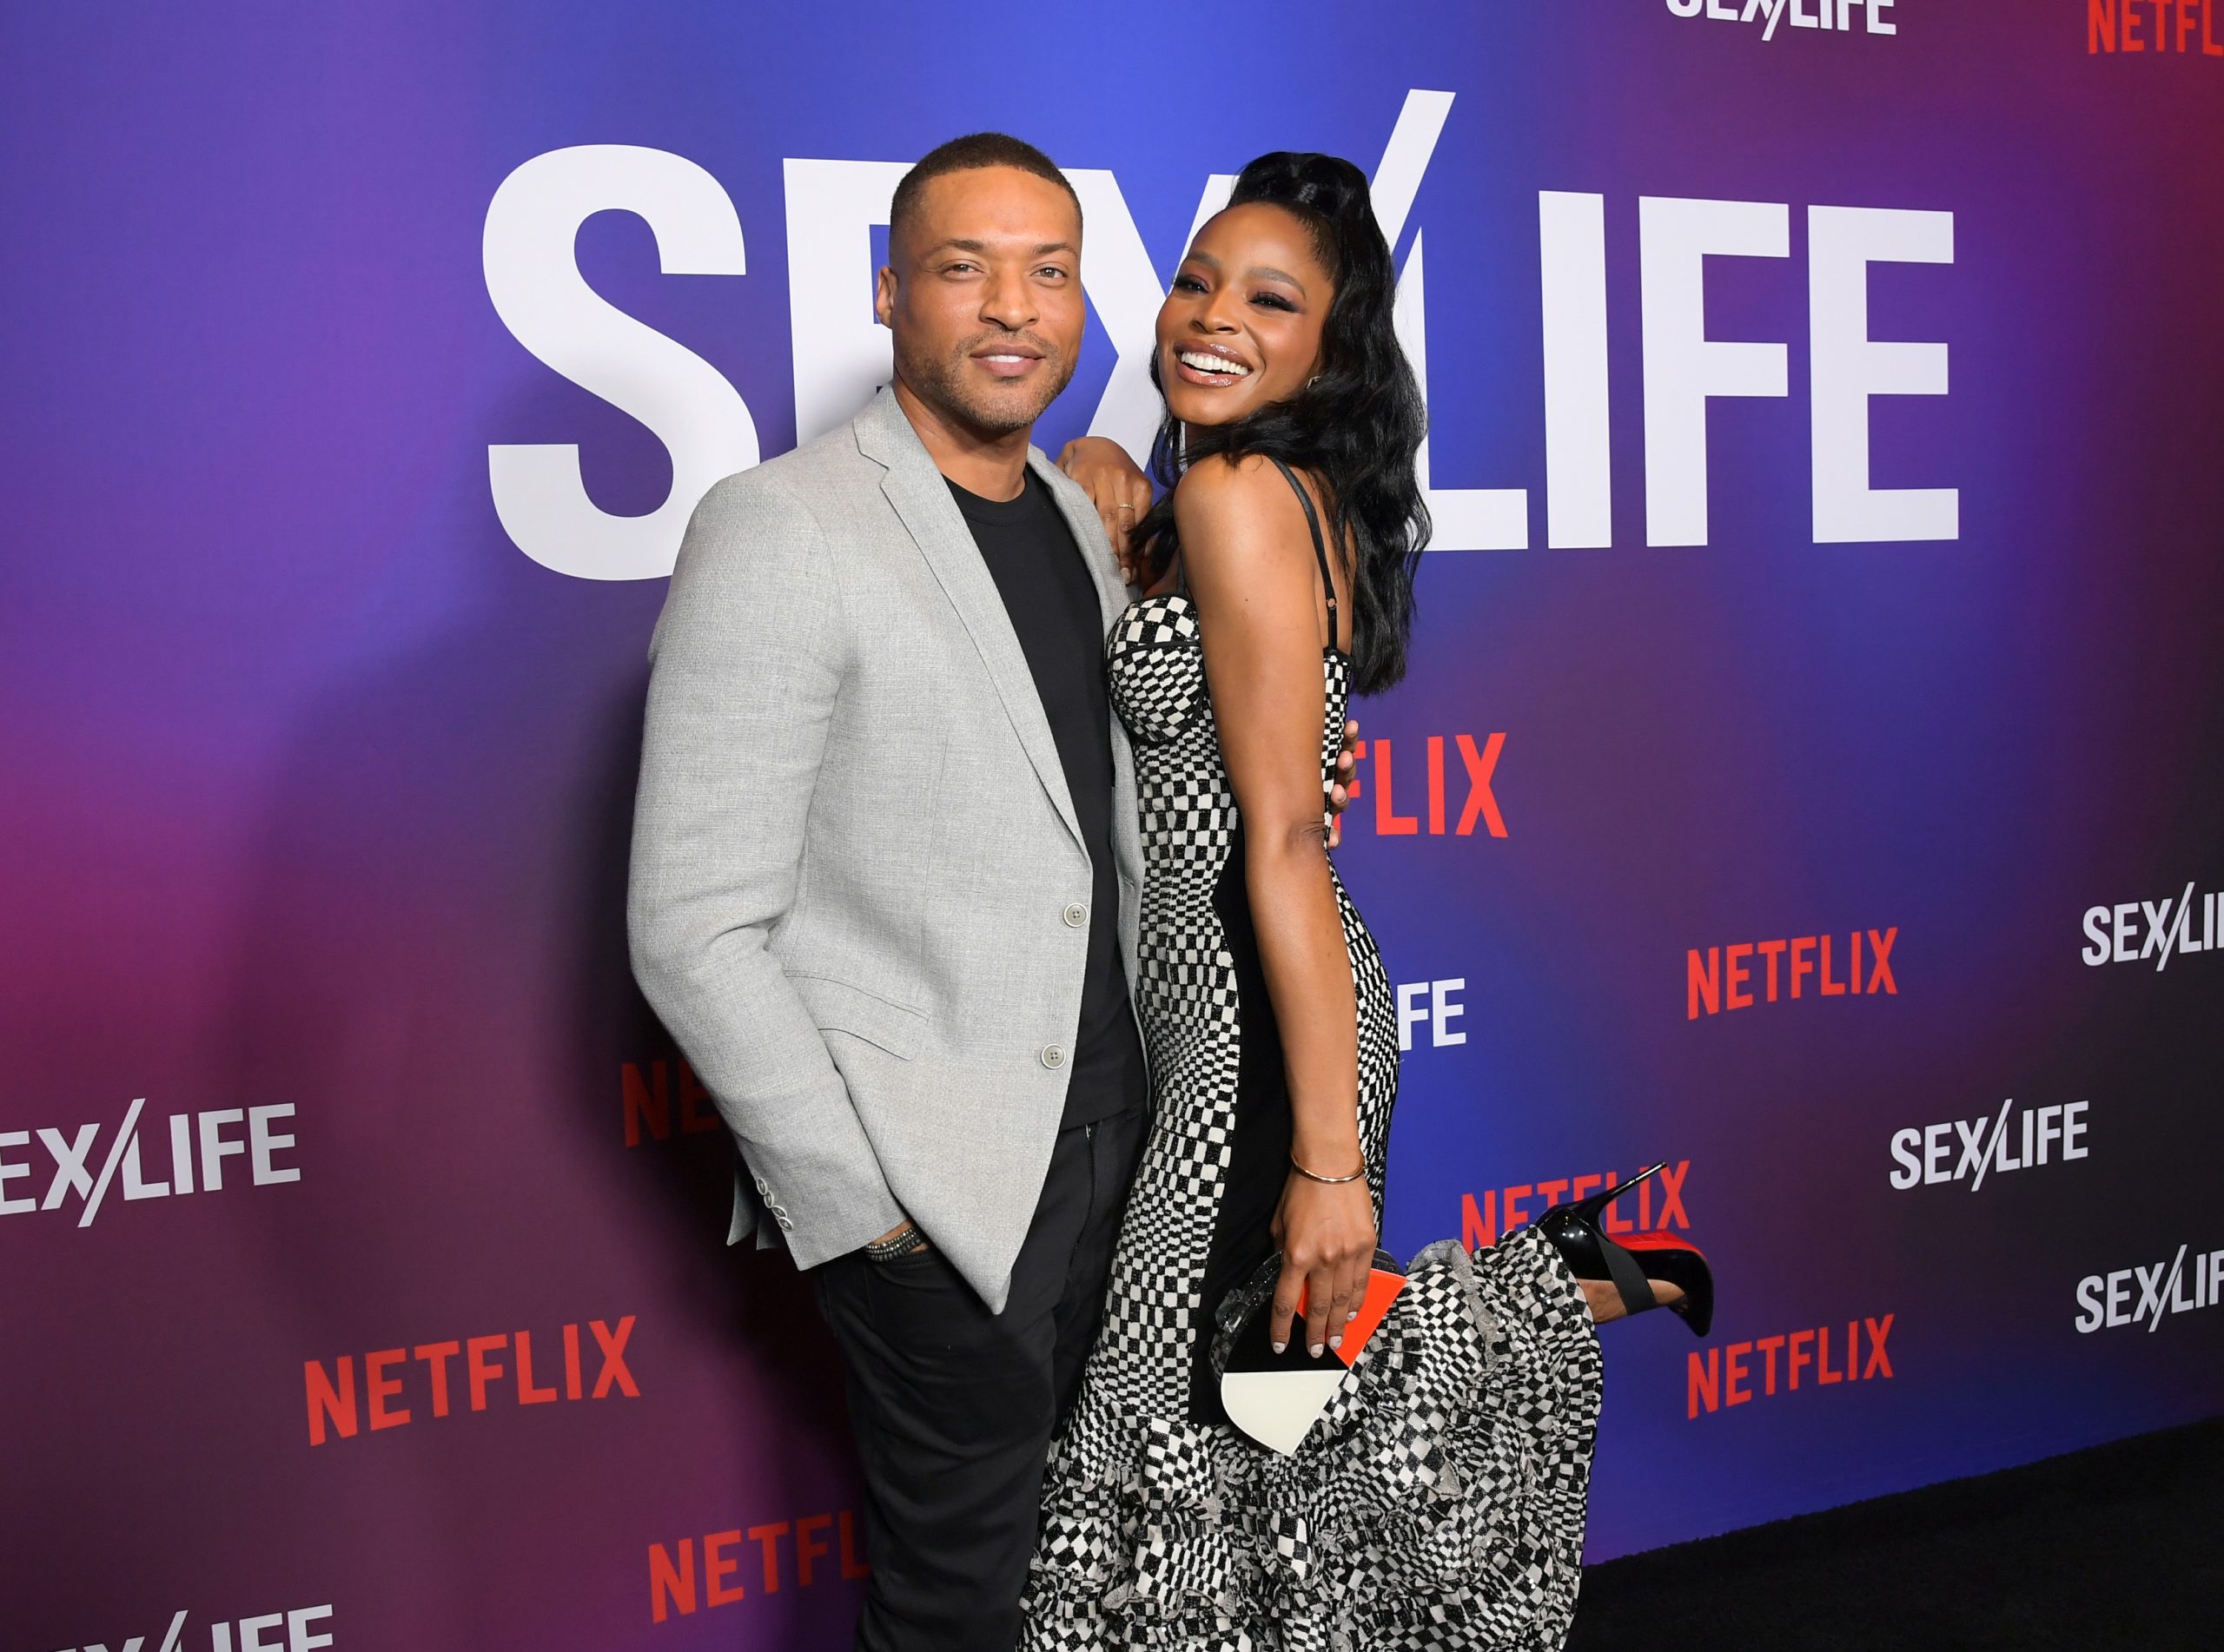 LOS ANGELES, CALIFORNIA - FEBRUARY 23: (L-R) Cleo Anthony and Margaret Odette attend Netflix's "Sex/Life" Season 2 Special Screening at the Roma Theatre at Netflix - EPIC on February 23, 2023 in Los Angeles, California. (Photo by Charley Gallay/Getty Images for Netflix)